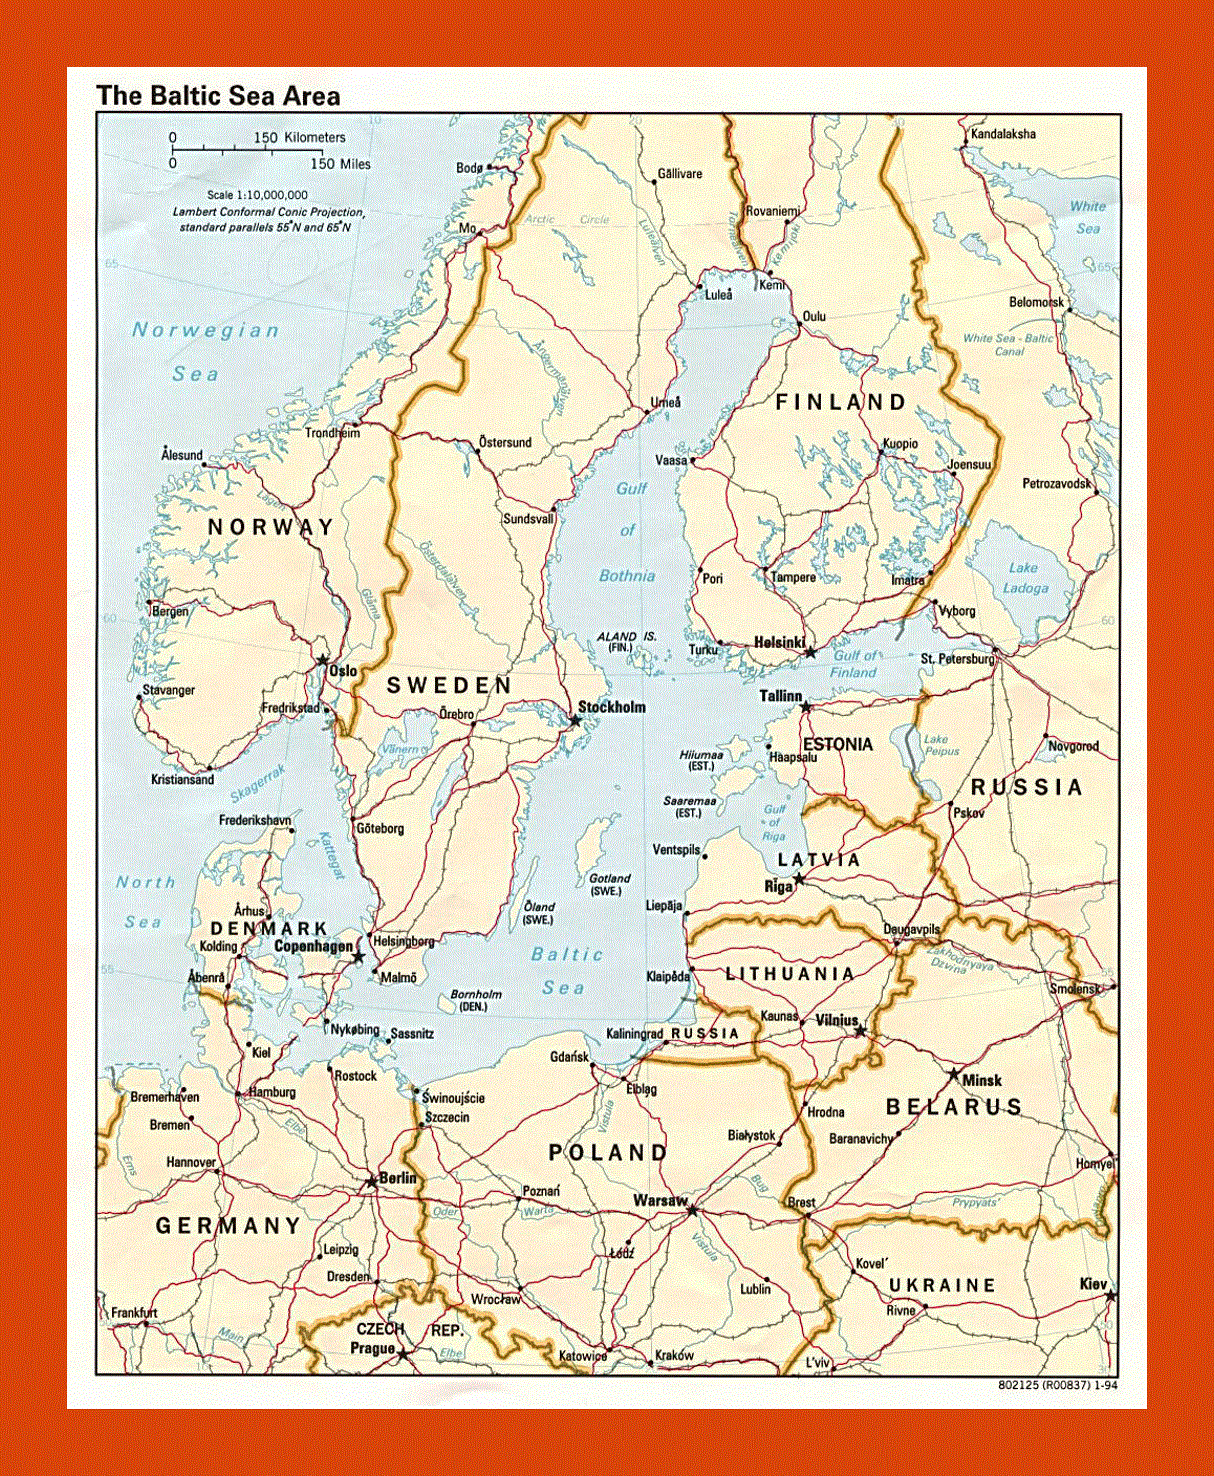 Map of the Baltic Sea Area - 1994